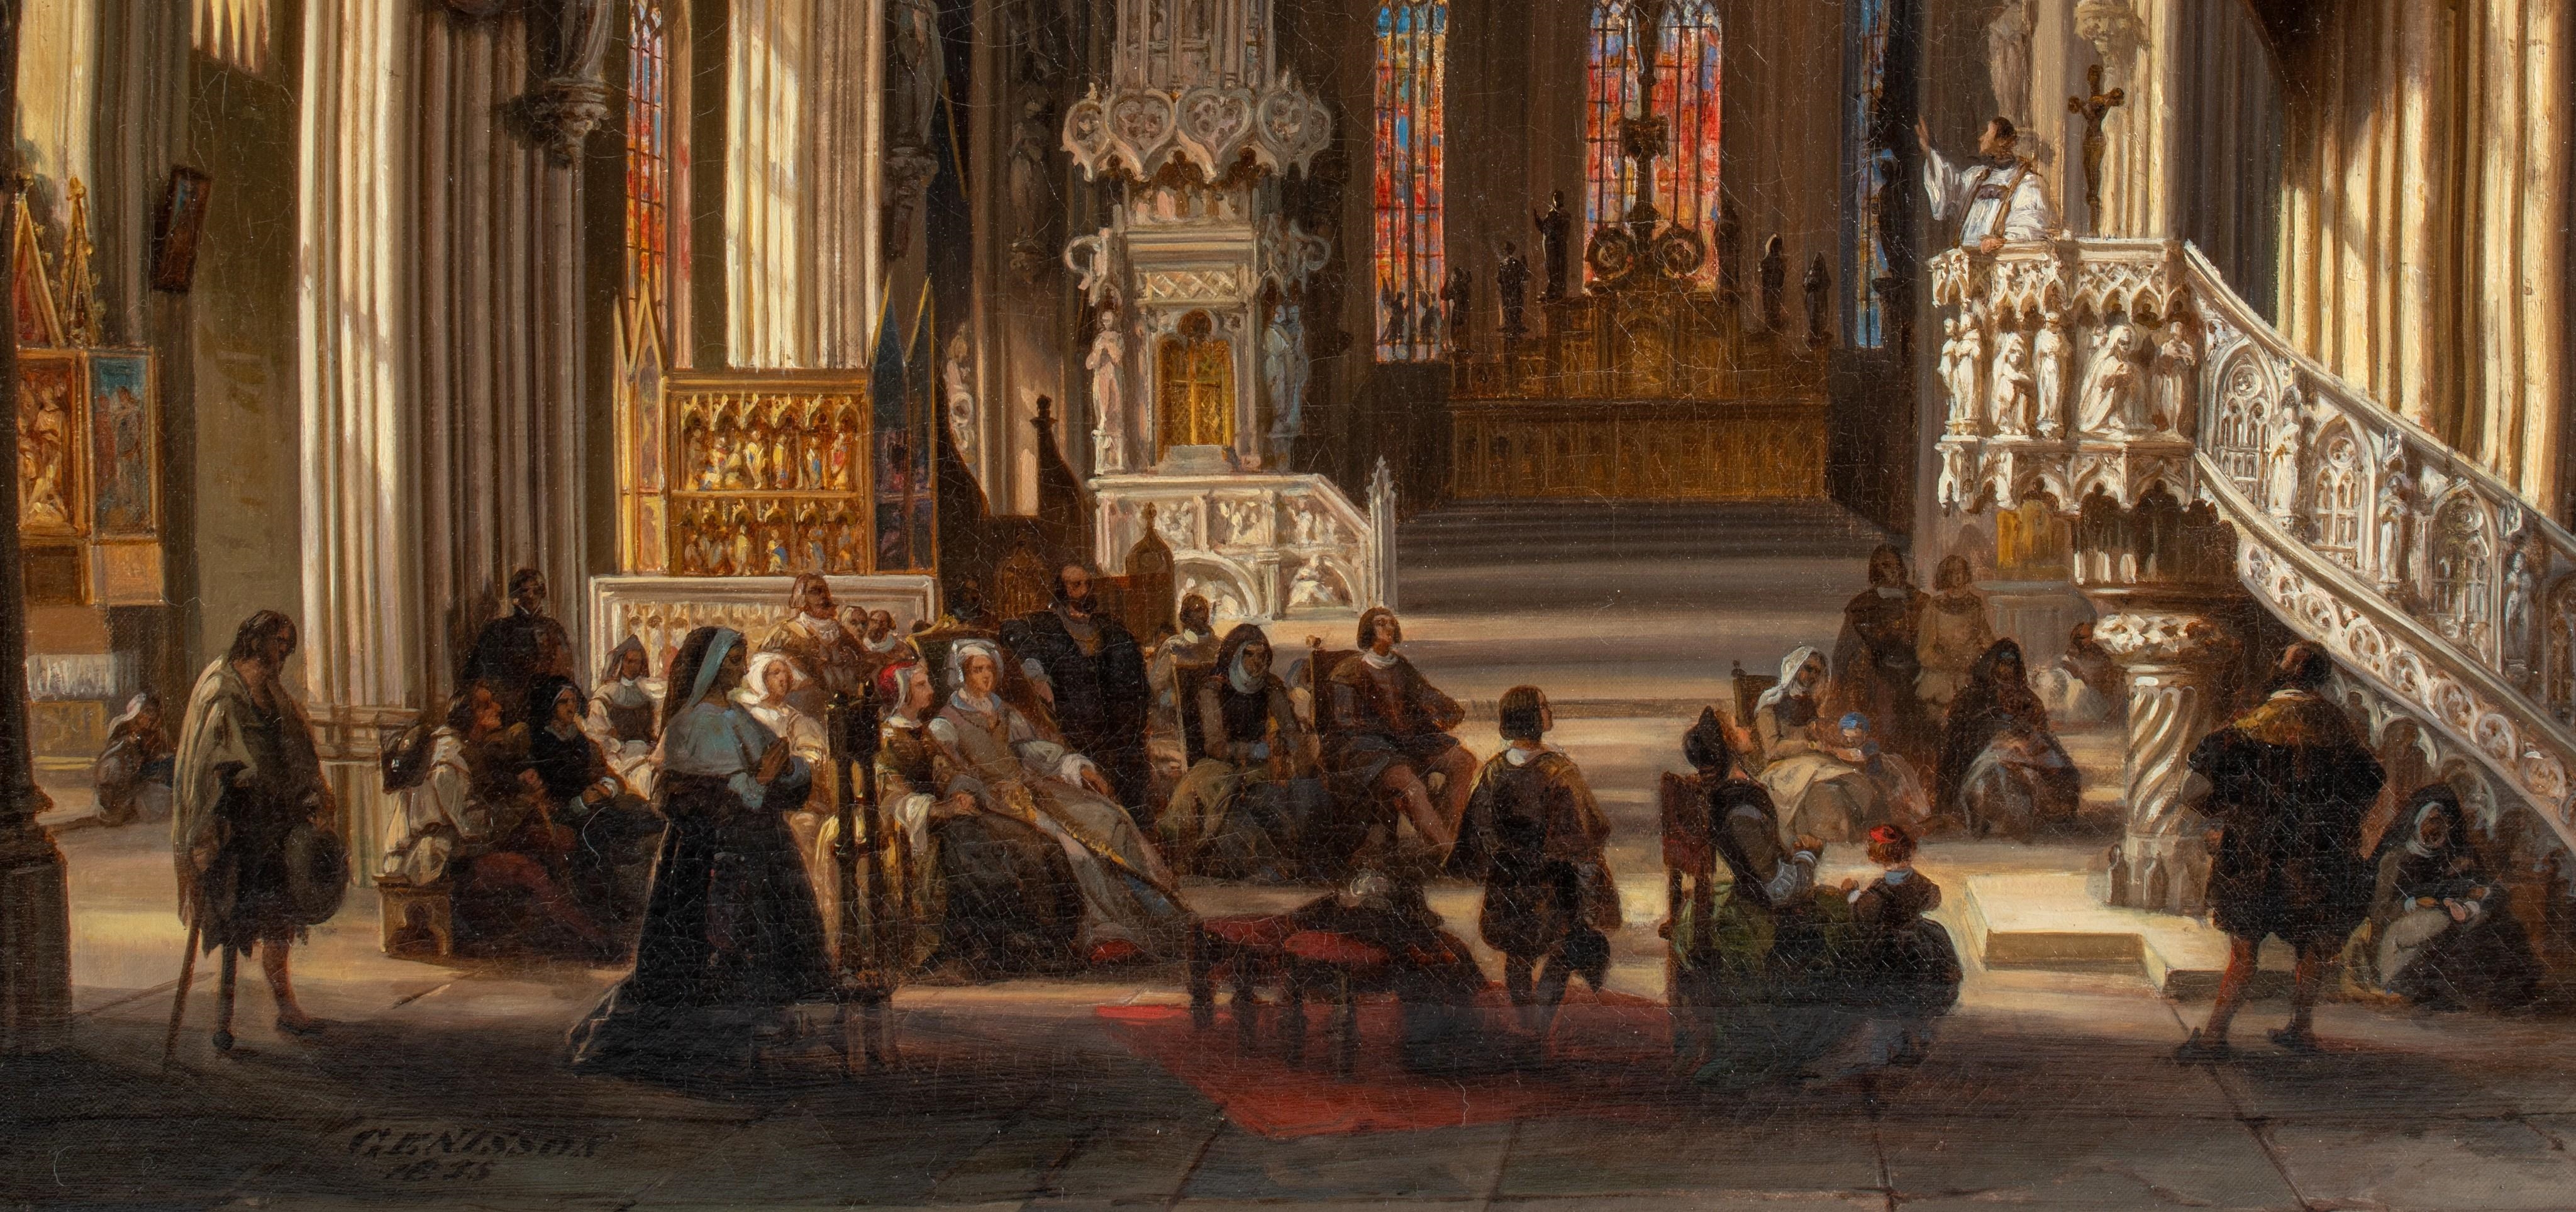 animated interior of Catholic Cathedrale by Jules Victor Genisson, 1855